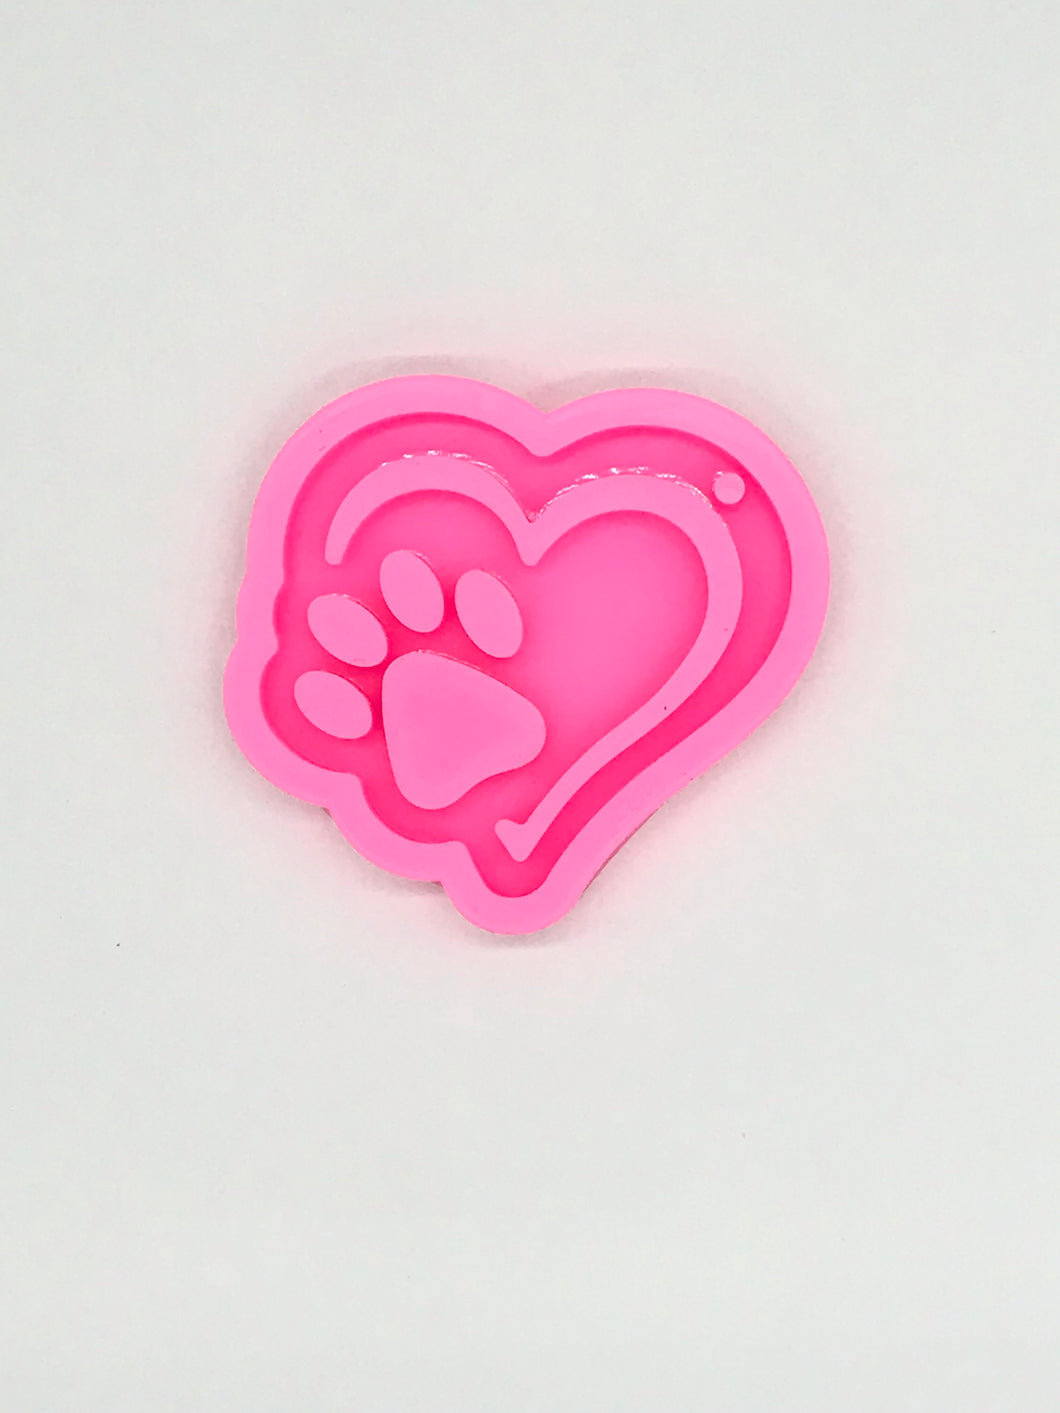 Heart/Paw Keychain Silicone Mold